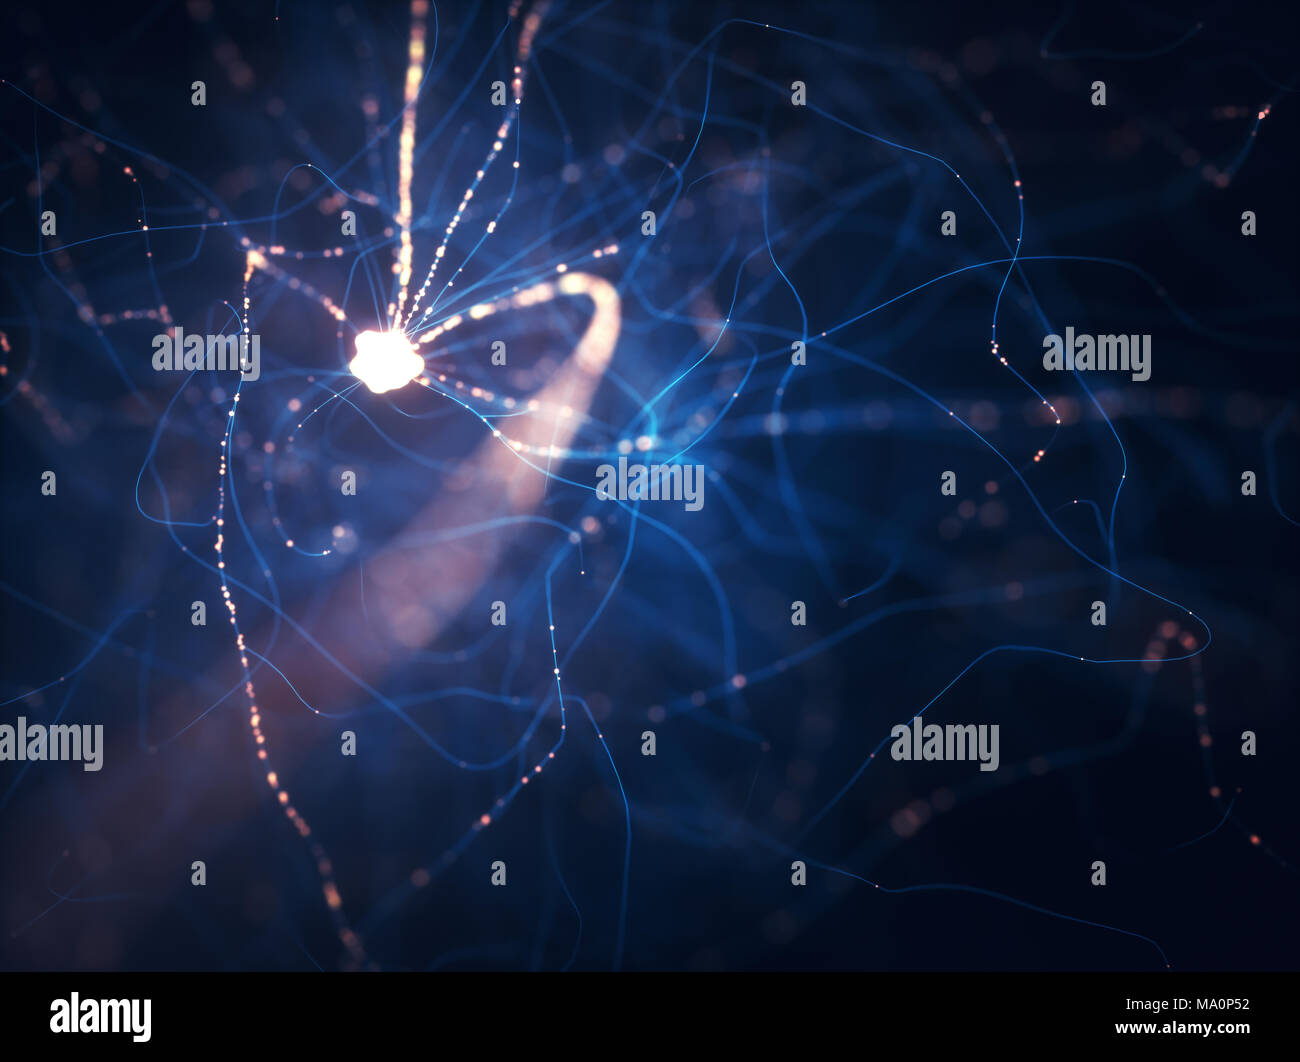 3D illustration of Interconnected neurons with electrical pulses. Stock Photo